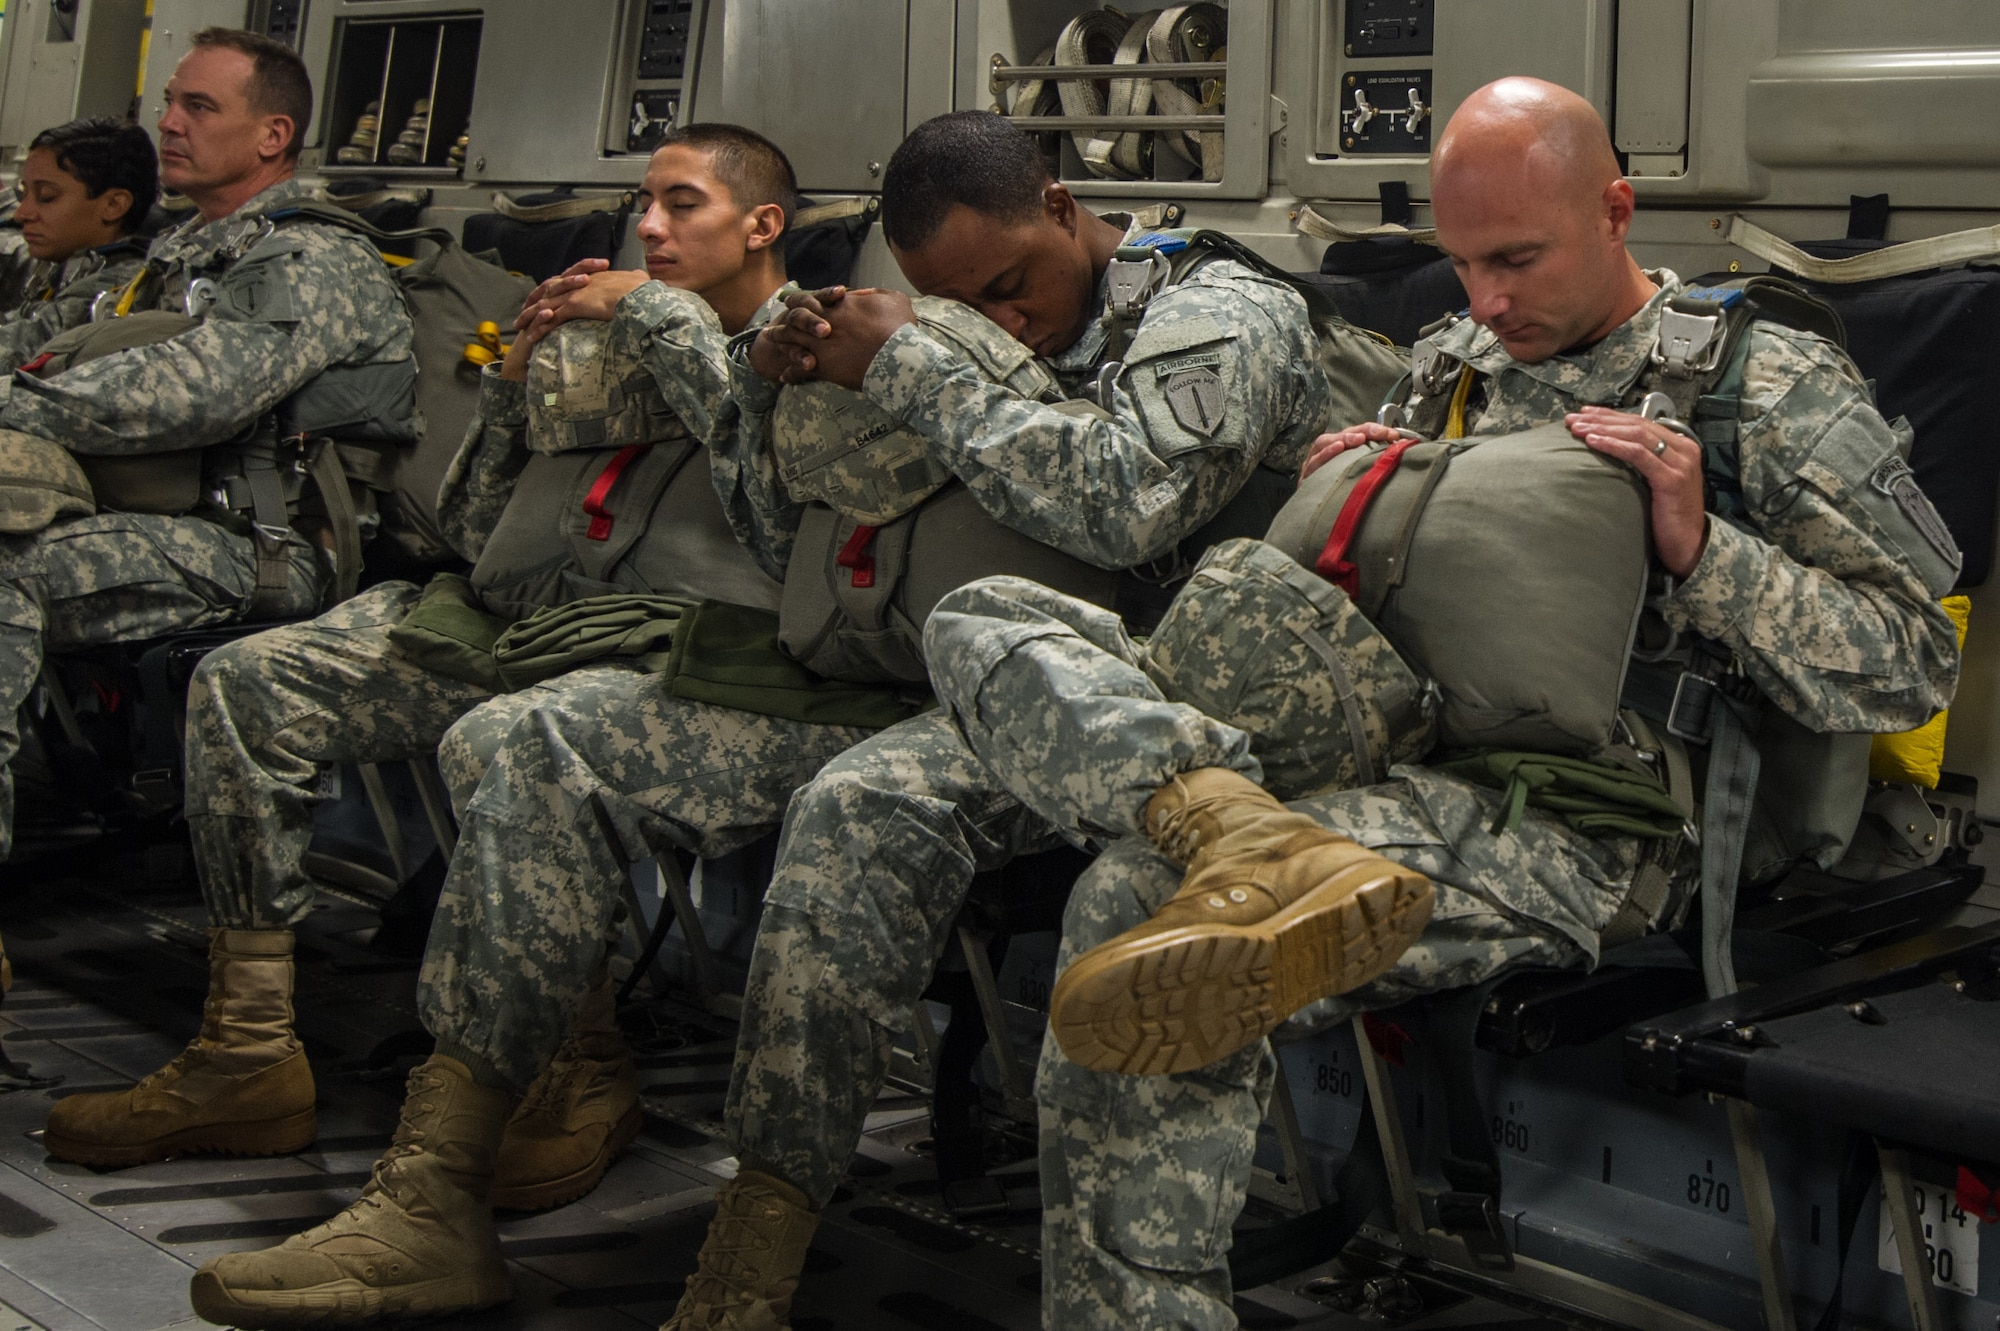 U.S. Army paratroopers being airlifted in a C-17 Globemaster III Aug. 15, 2015 over Lawson Army Airfield, Fort Benning, Ga. Reserve aircrews from the 701st and 300th Airlift Squadron out of Joint Base Charleston, S.C. flew two C-17s during Fort Benning’s celebration of the 75th anniversary of the U.S. Army Airborne School. Almost 300 paratroopers took the big leap in the day’s event. (U.S. Air Force photo by Staff Sgt. Bobby Pilch)